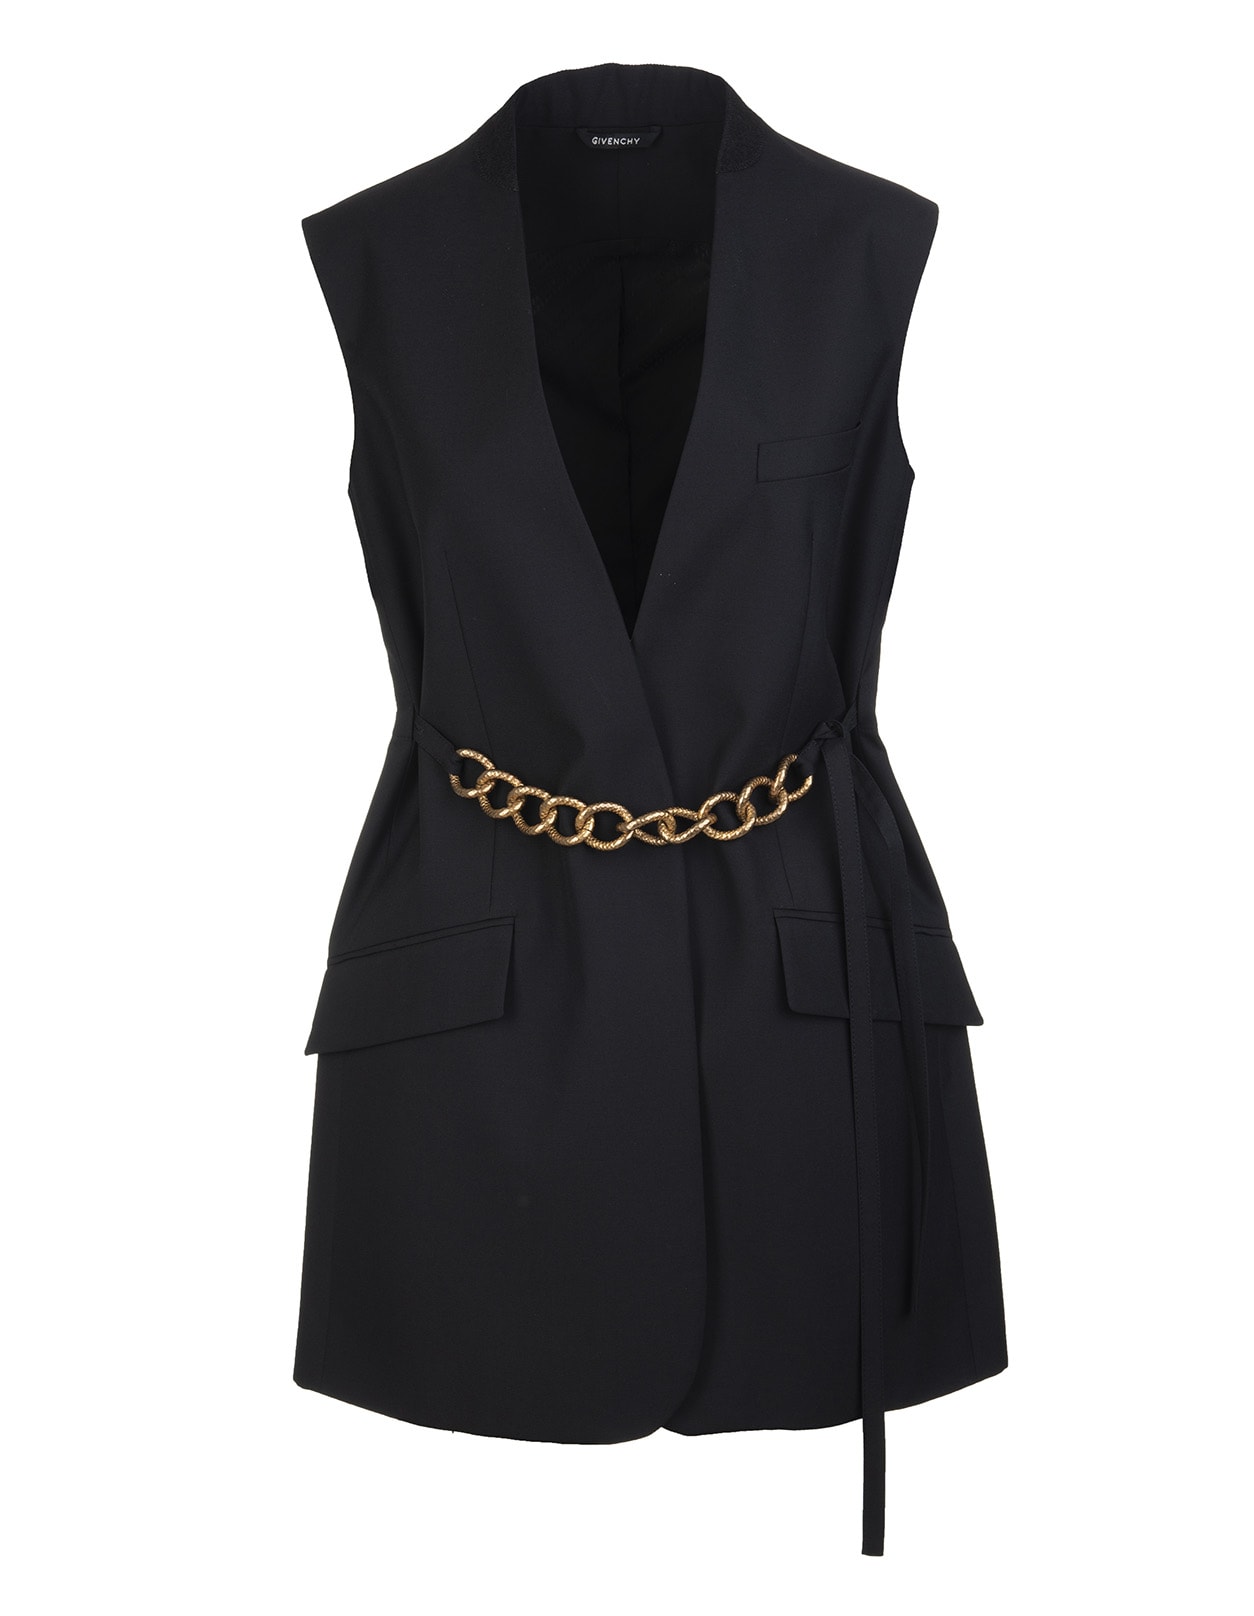 Givenchy Woman Black Lightweight Wool Sleeveless Jacket With Chain